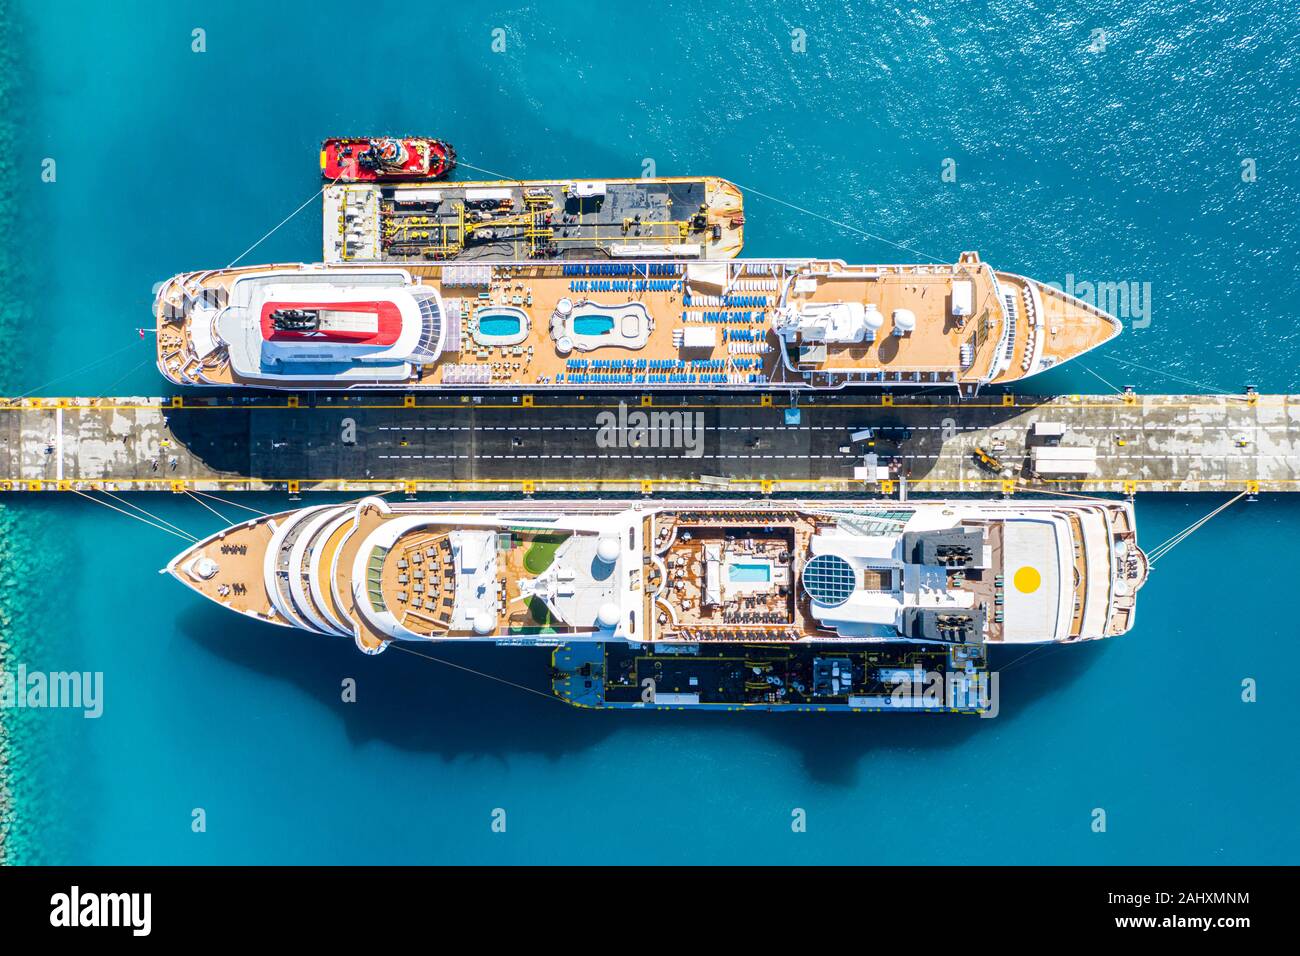 Aerial view of two giant cruise ships moored in the port of Philipsburg along with three barges, island of Sint Maarten, Dutch Antilles, West Indies, Stock Photo